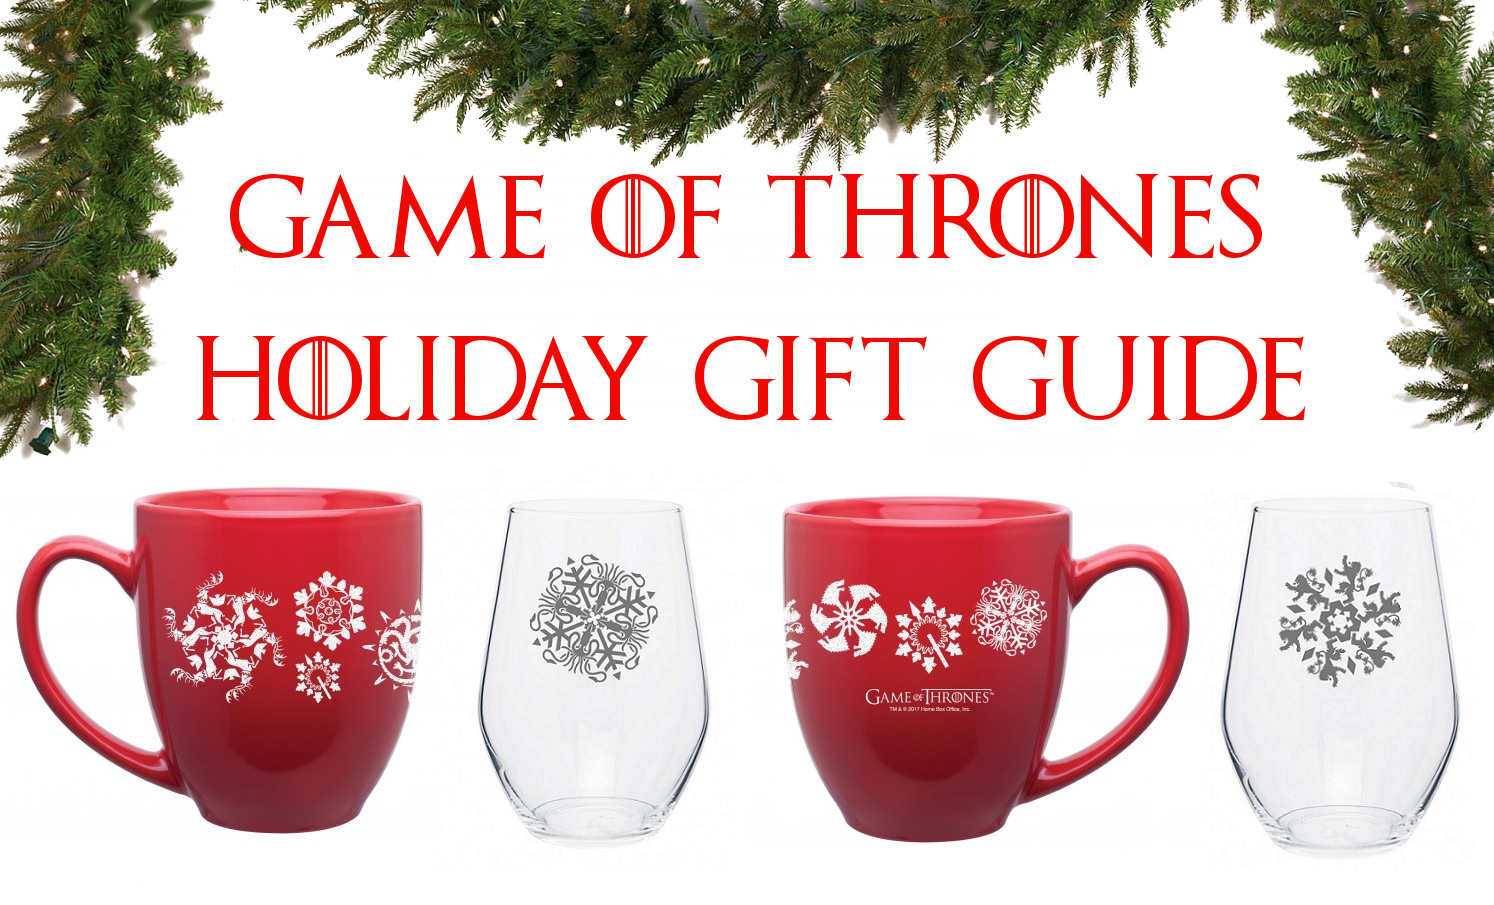 Game of Thrones Holiday Guide Banner